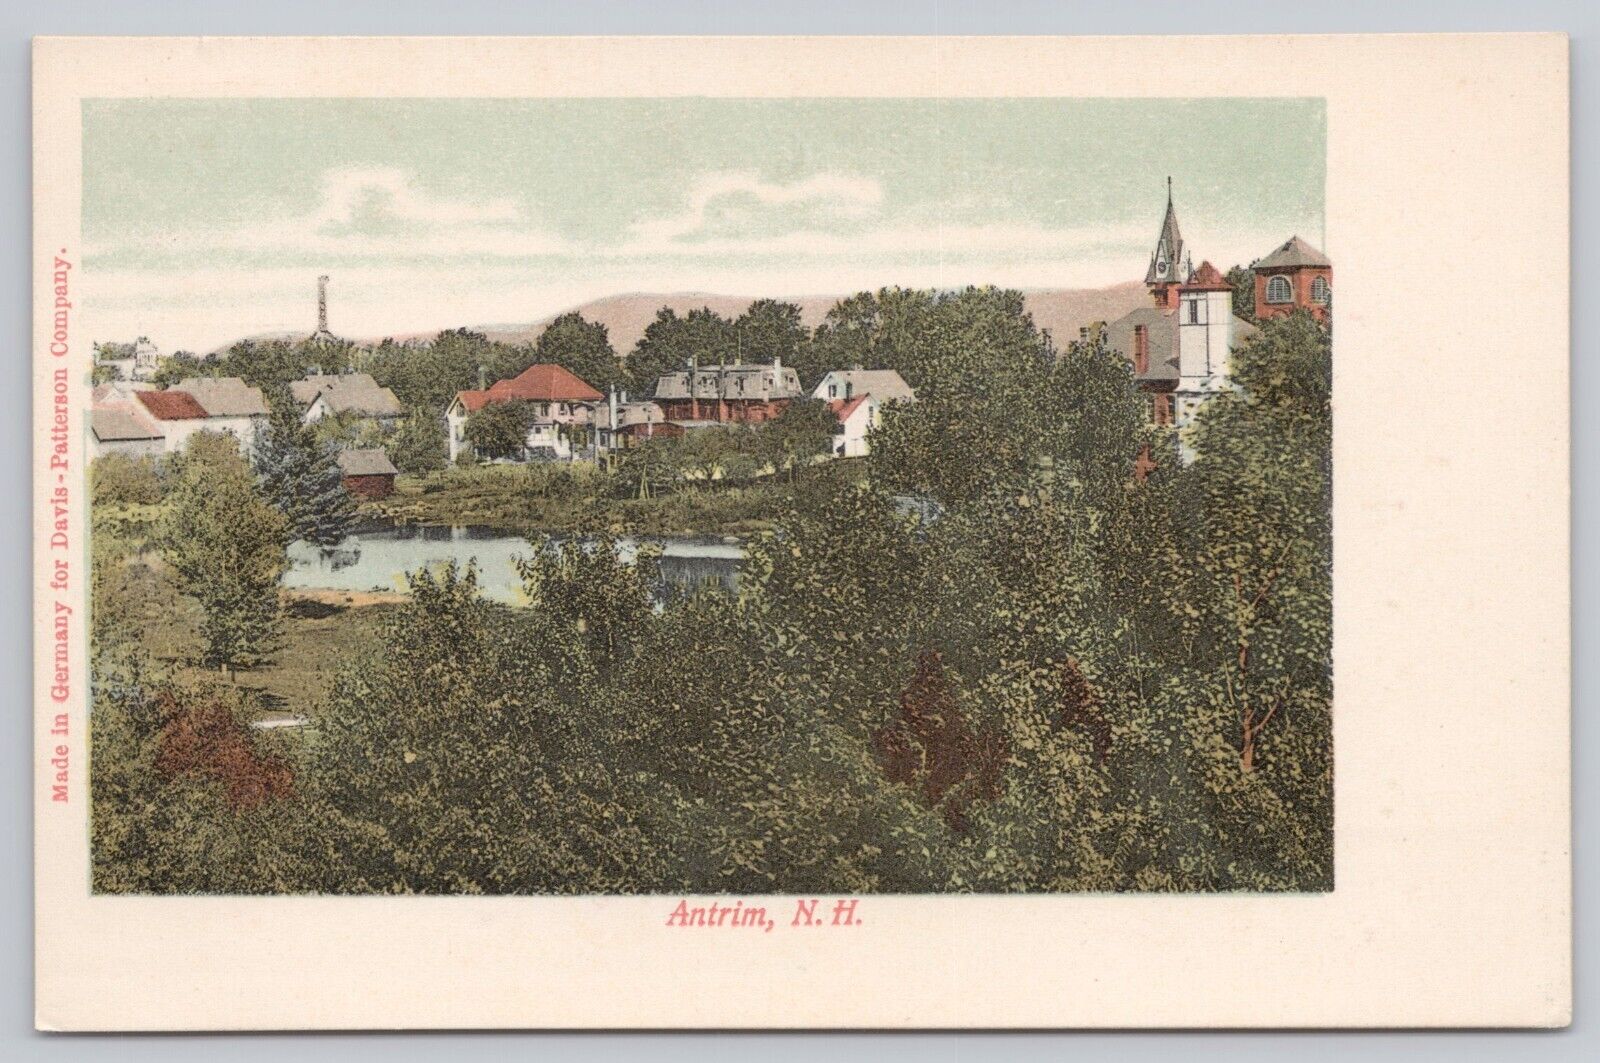 Antrim New Hampshire, Scenic View of the Town, Vintage Postcard